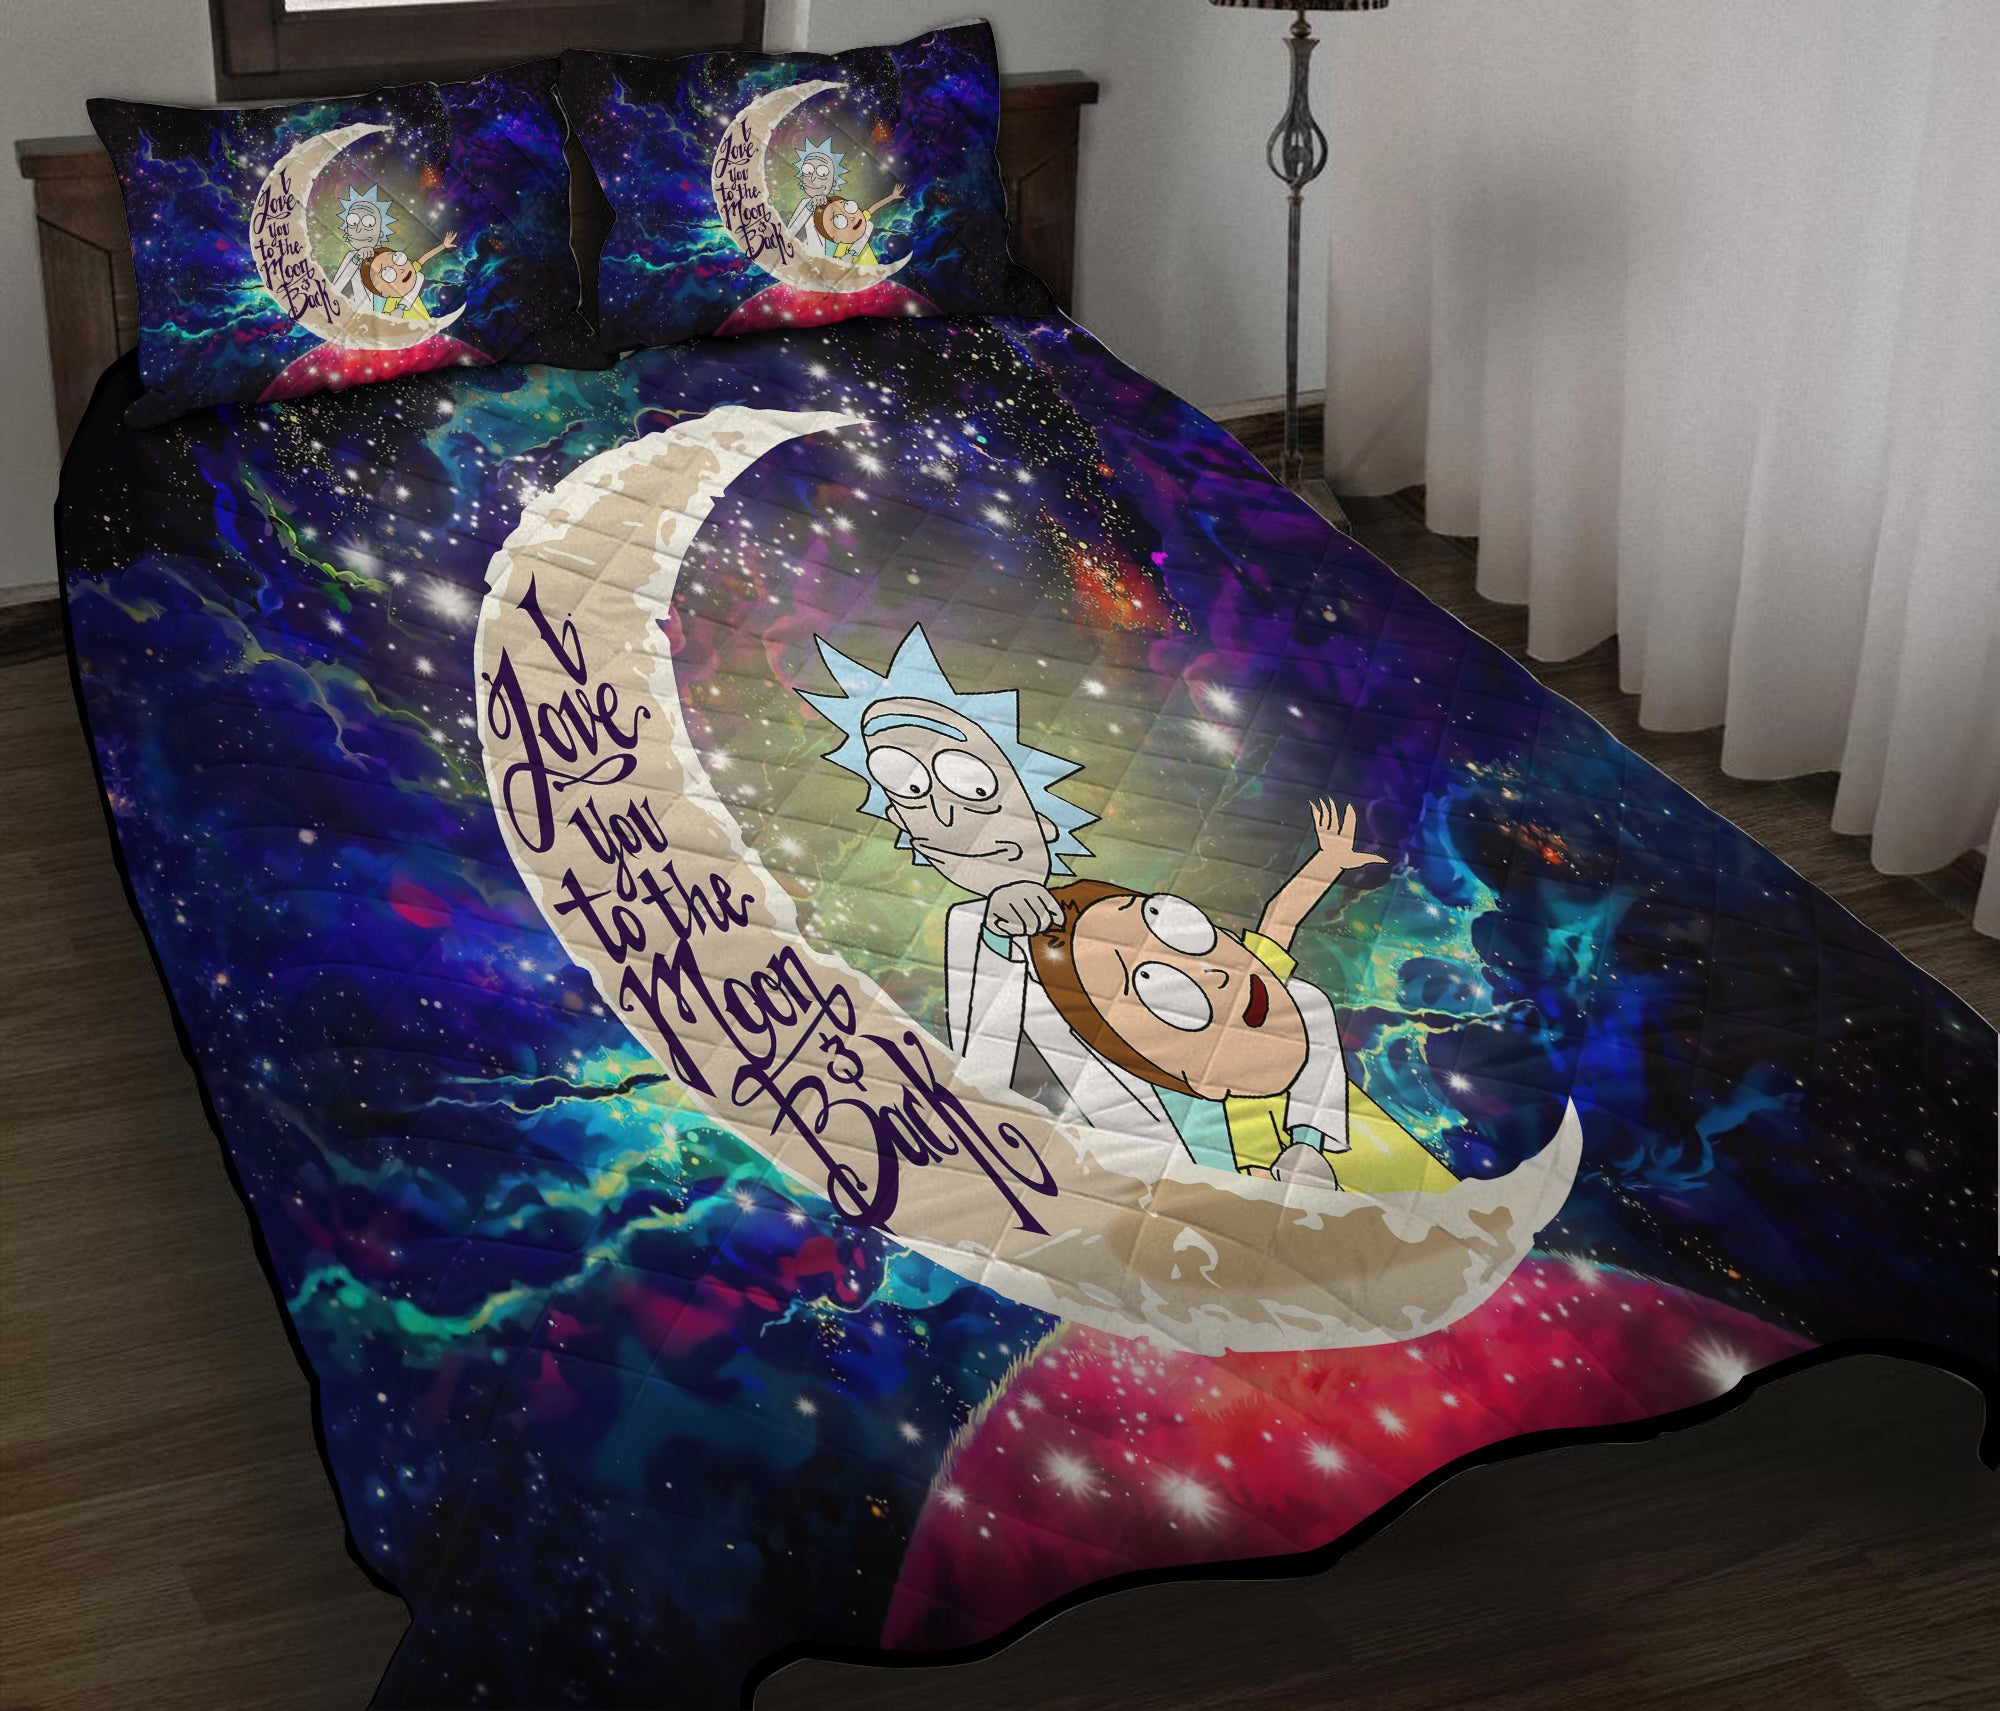 Rick And Morty Cute Love You To The Moon Galaxy Quilt Bed Sets Nearkii